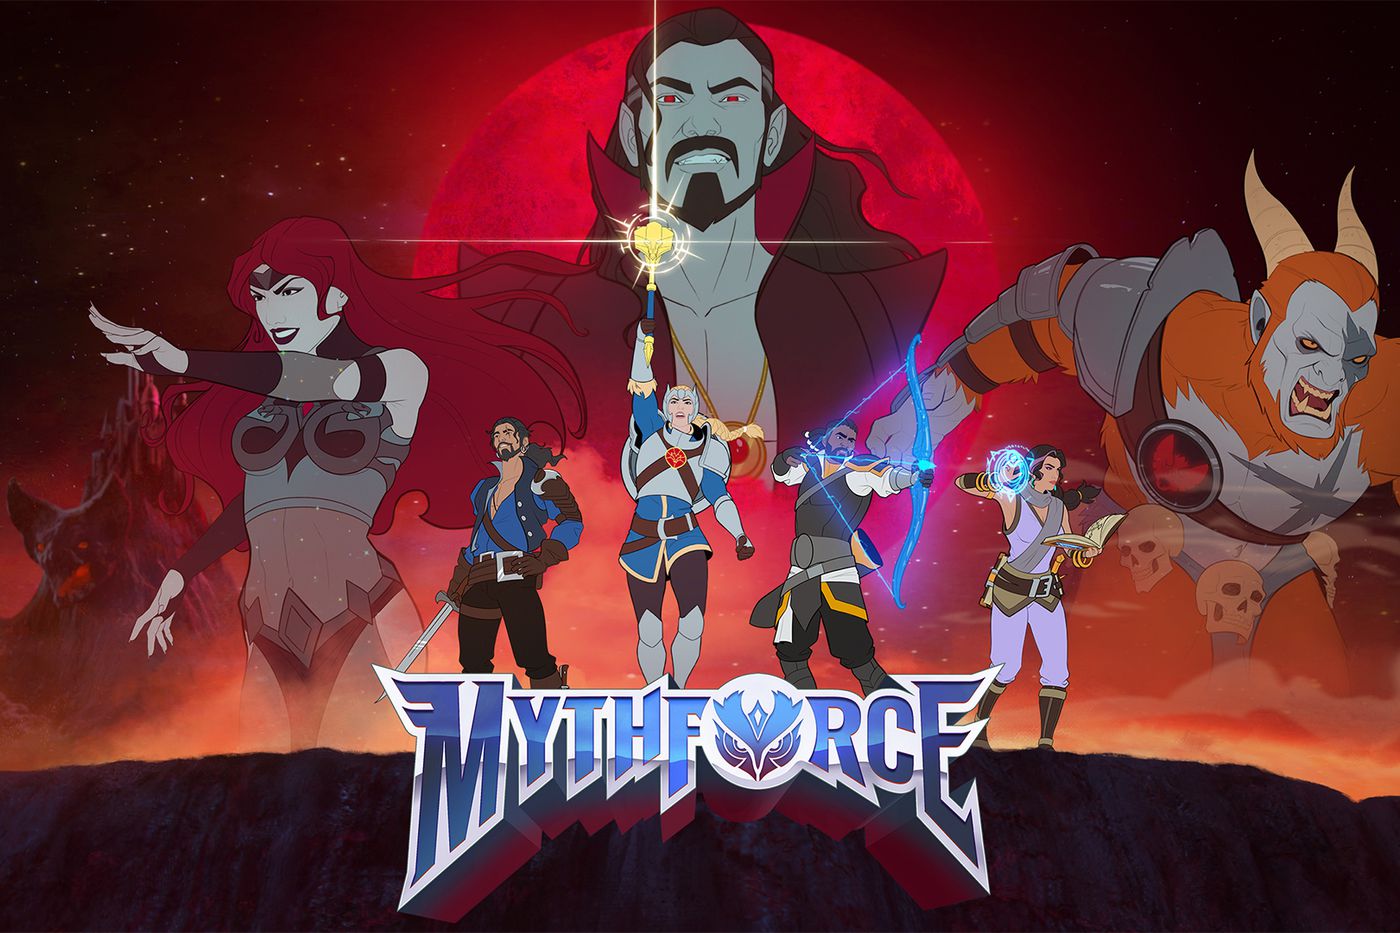 MythForce, an 80's cartoon video game, has landed on Steam and is gearing up for a console release.